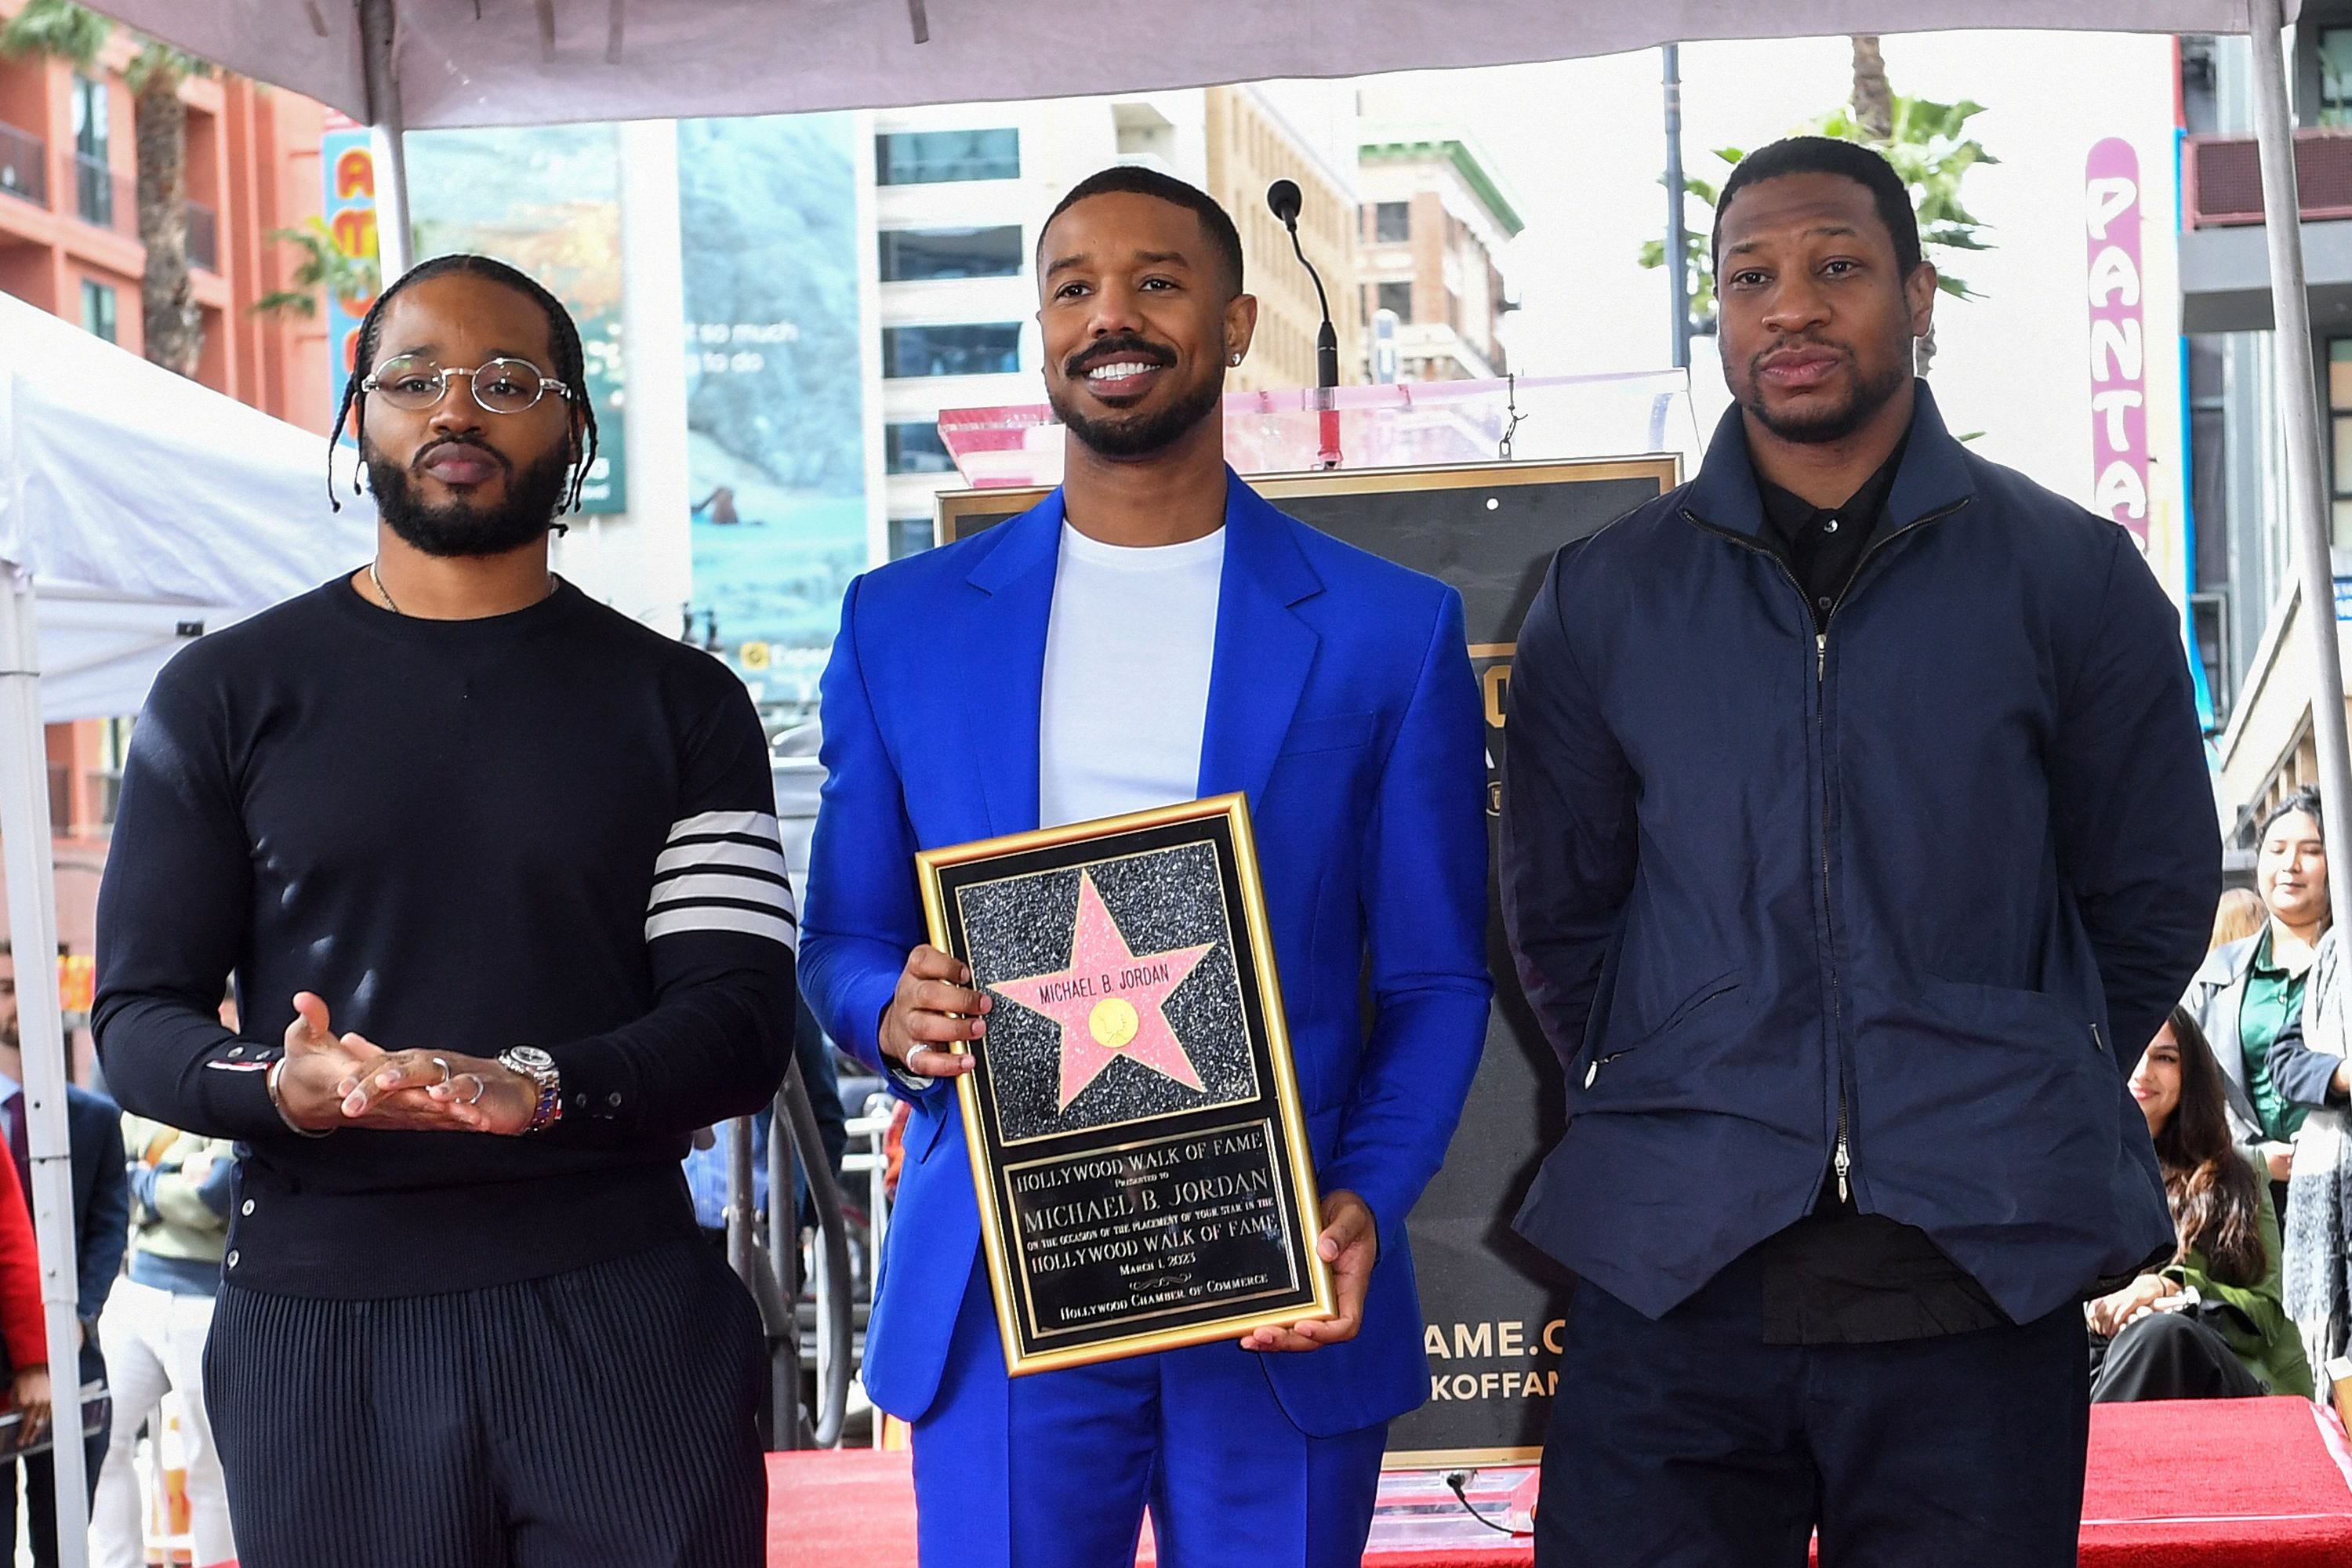 Jordan was joined by "Creed" and "Black Panther" director Ryan Coogler and his "Creed III" co-star Jonathan Majors for the March 1 ceremony.